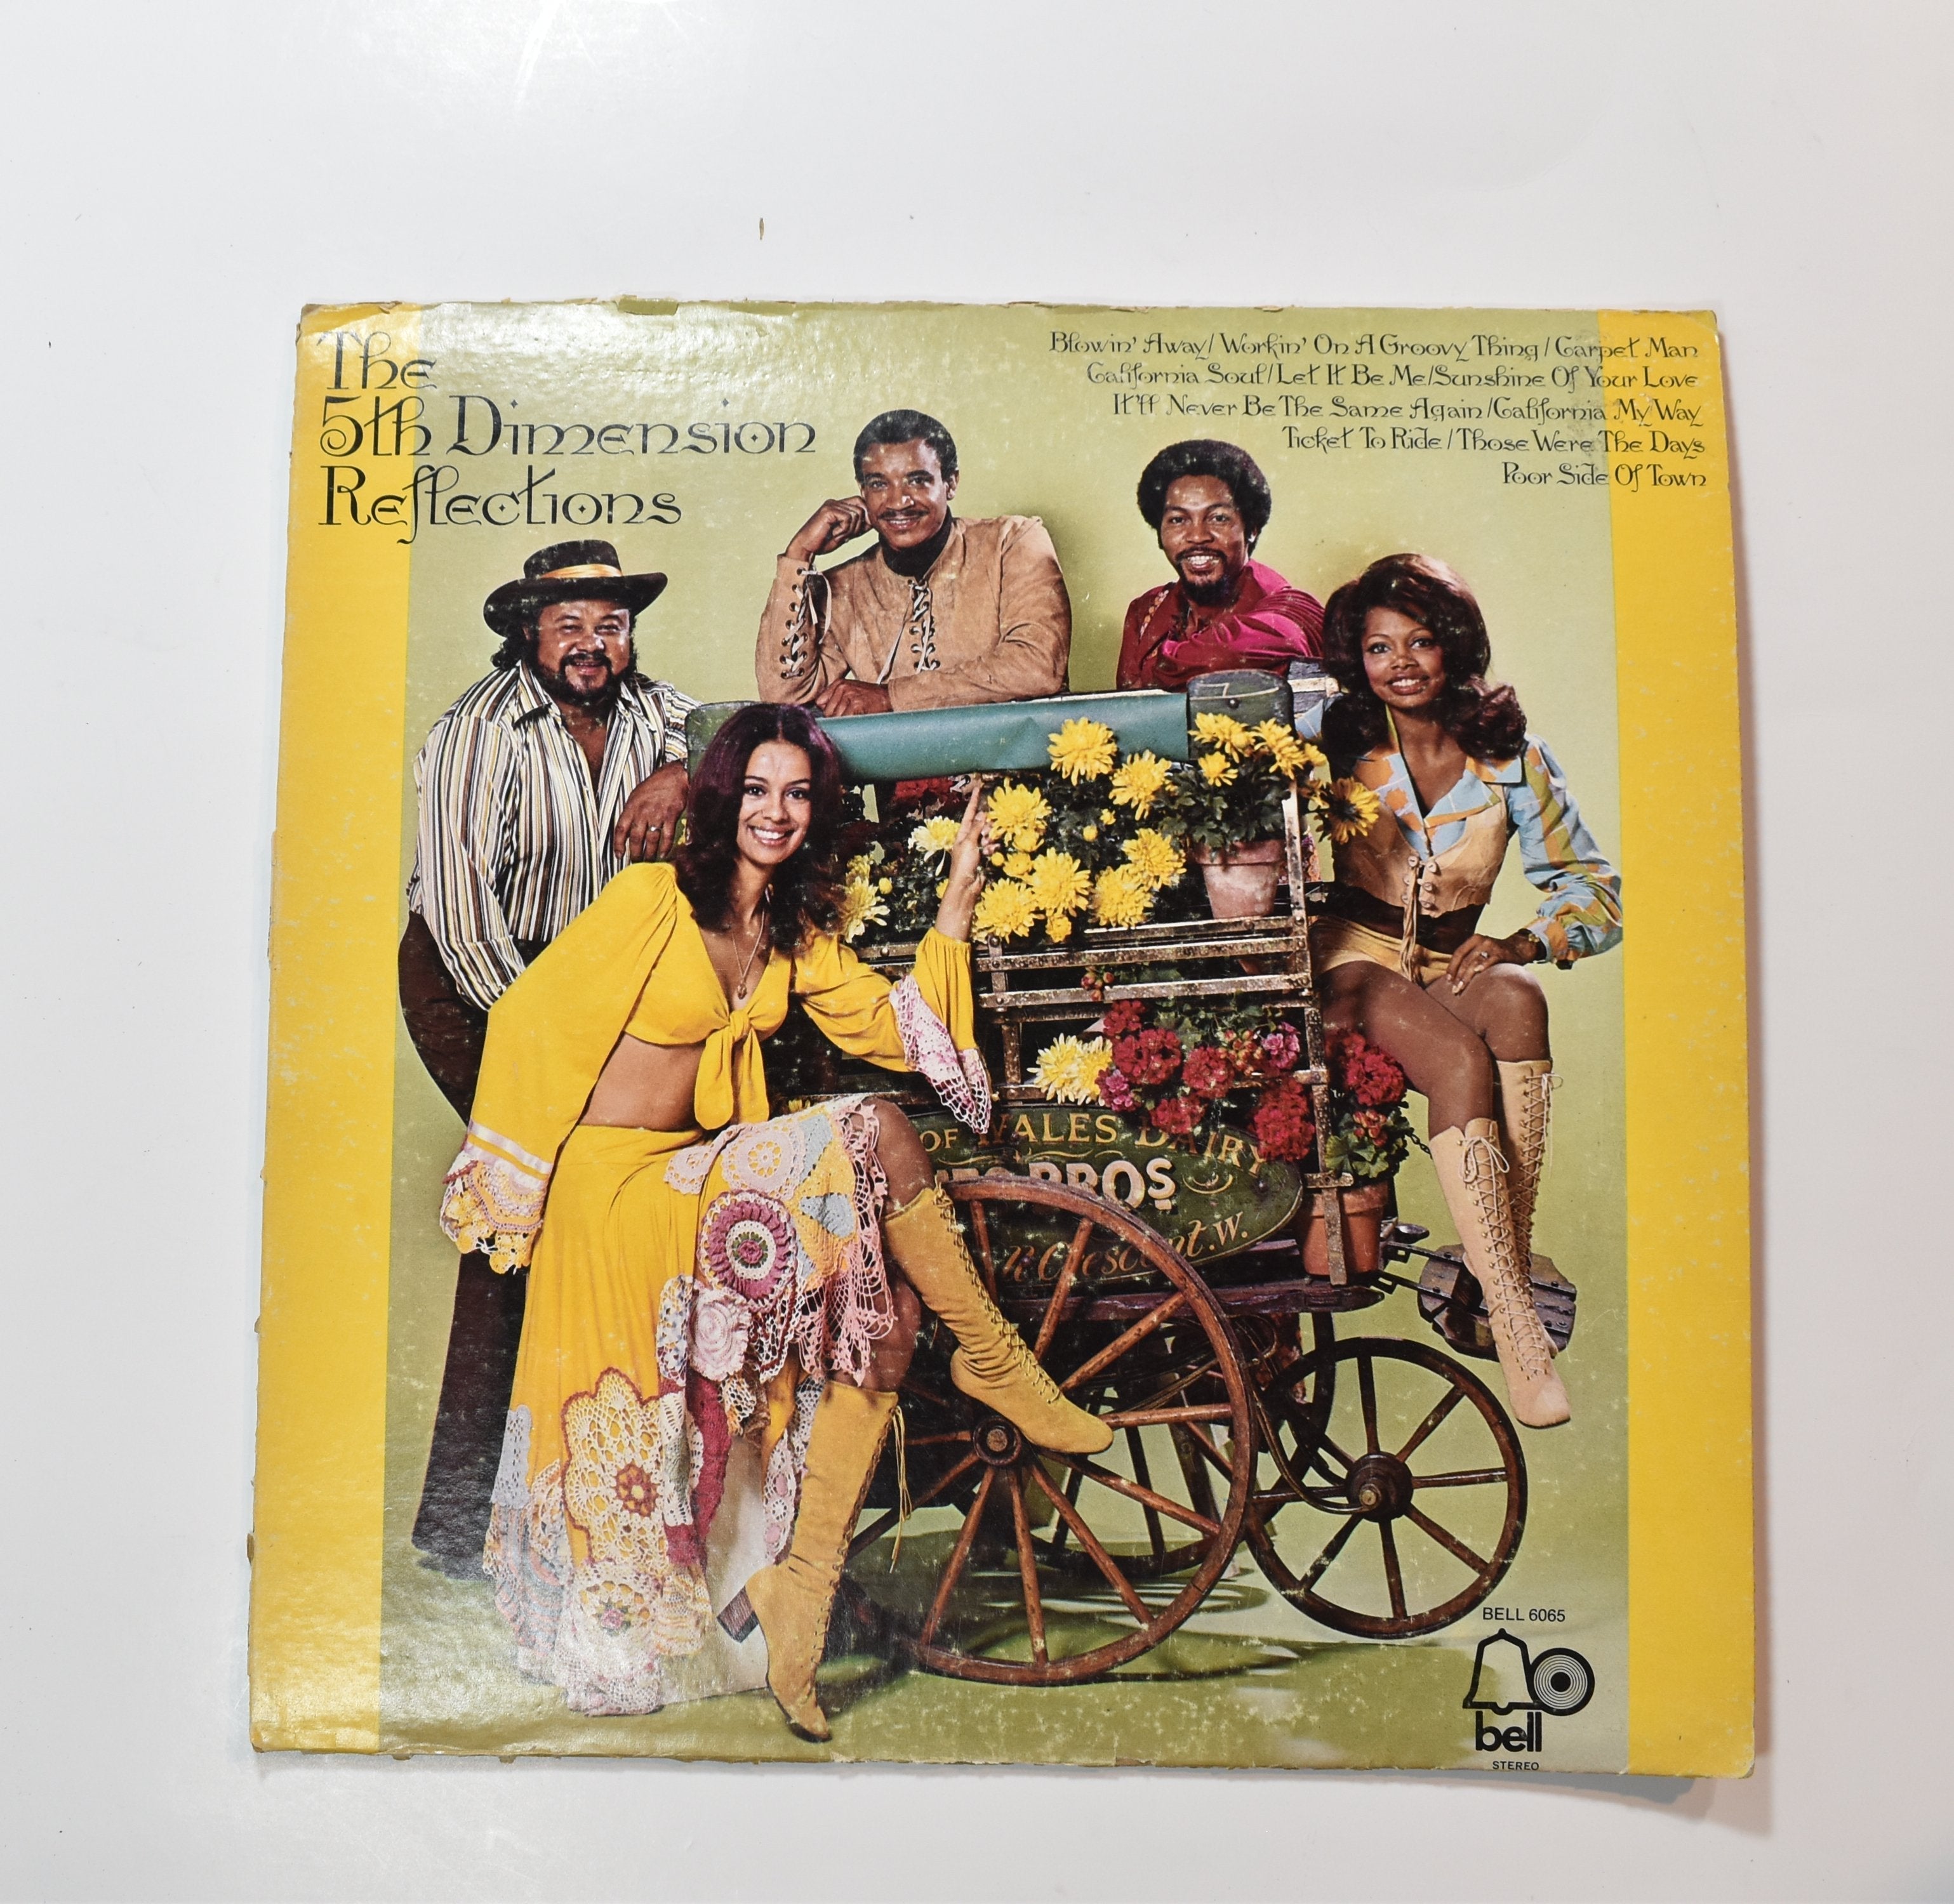 Vinyl Music Record The 5th Dimension Reflections used vinyl record